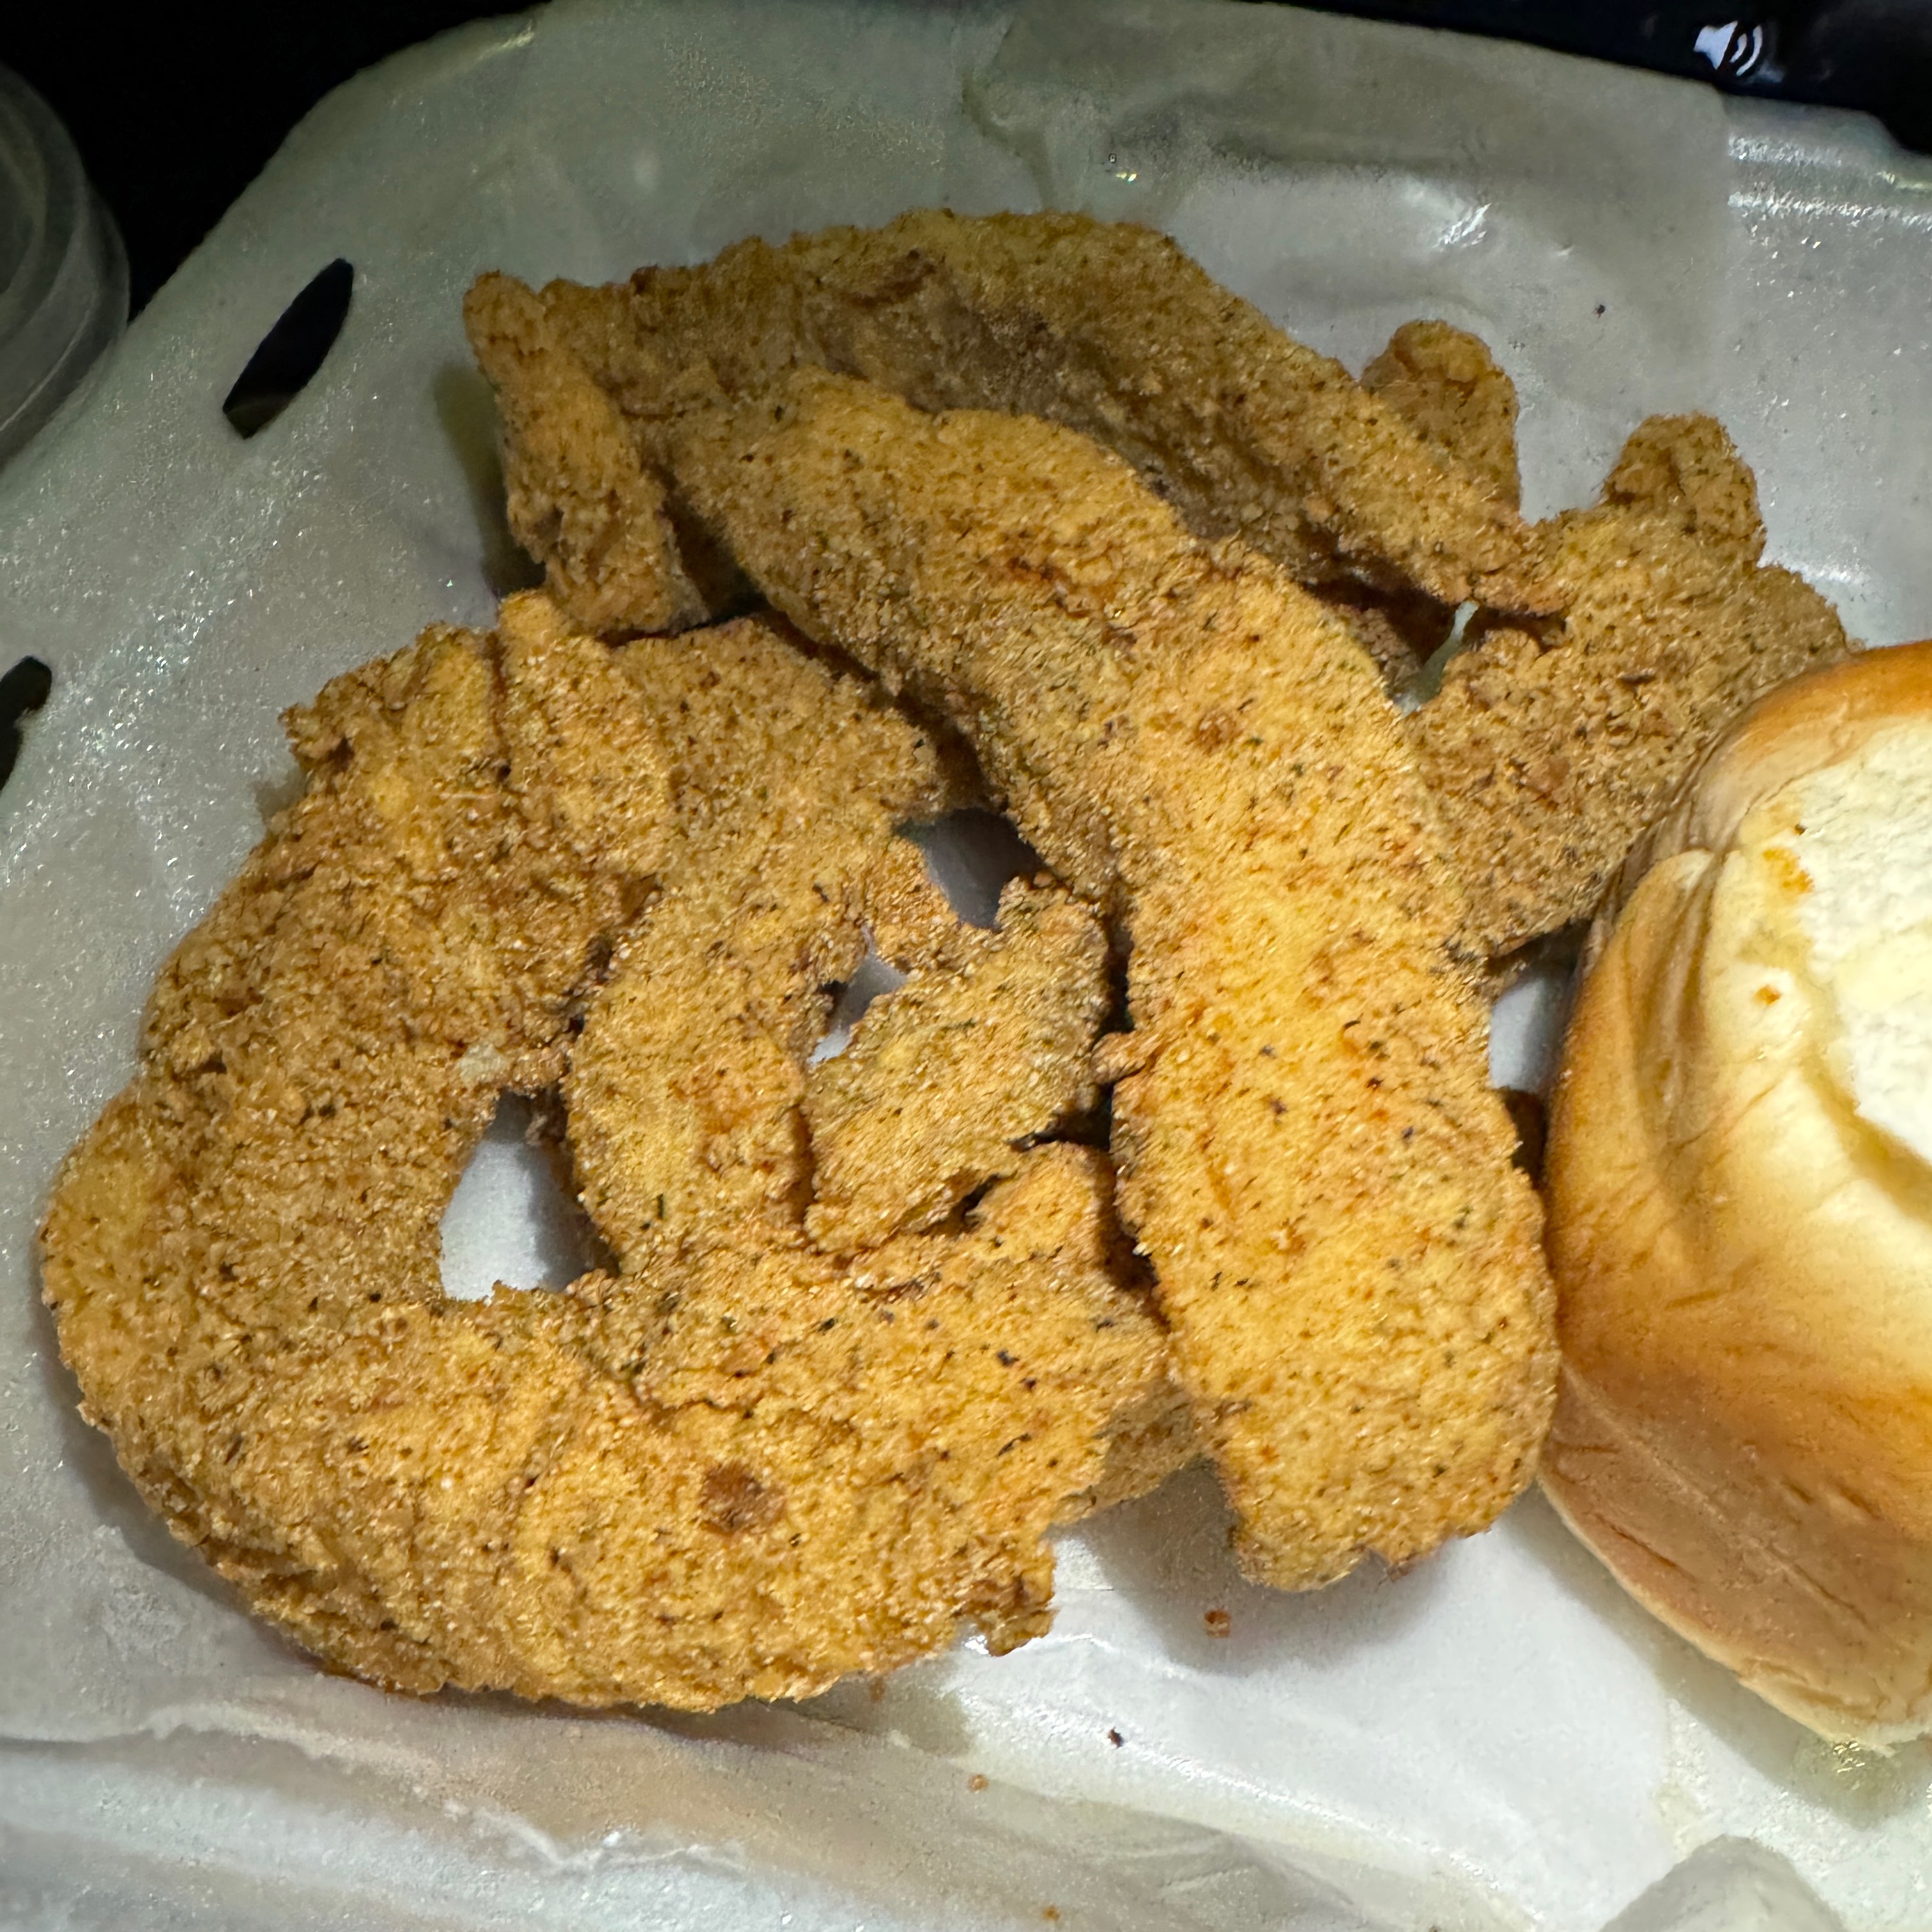 Fried Catfish Dinner $13.70 at Cw & Chris Chicken & Shrimp on #foodmento http://foodmento.com/place/8728